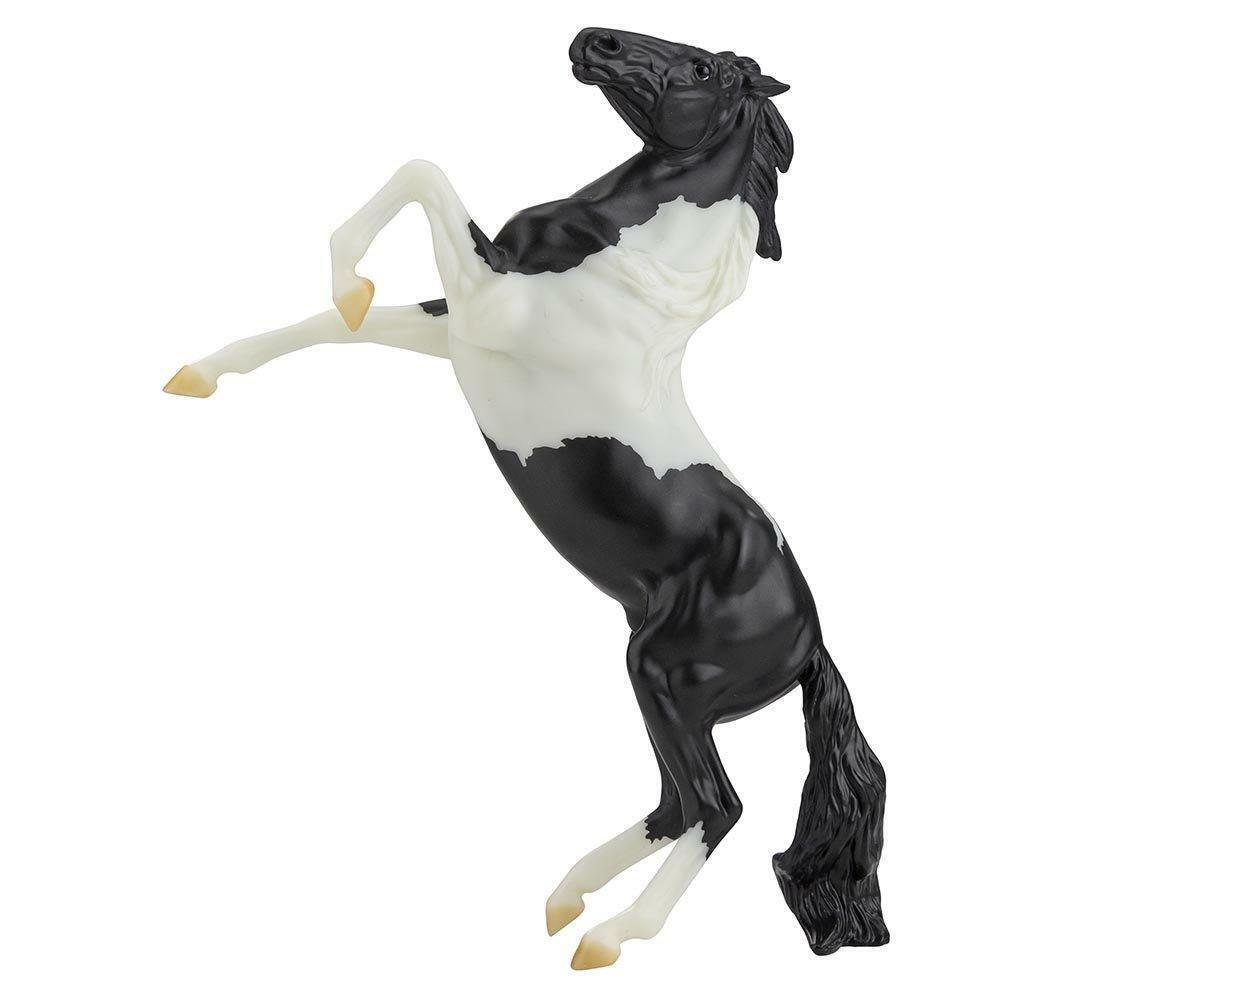 Breyer Horses Classic Size Freedom Series Black Pinto Mustang Horse Model #961